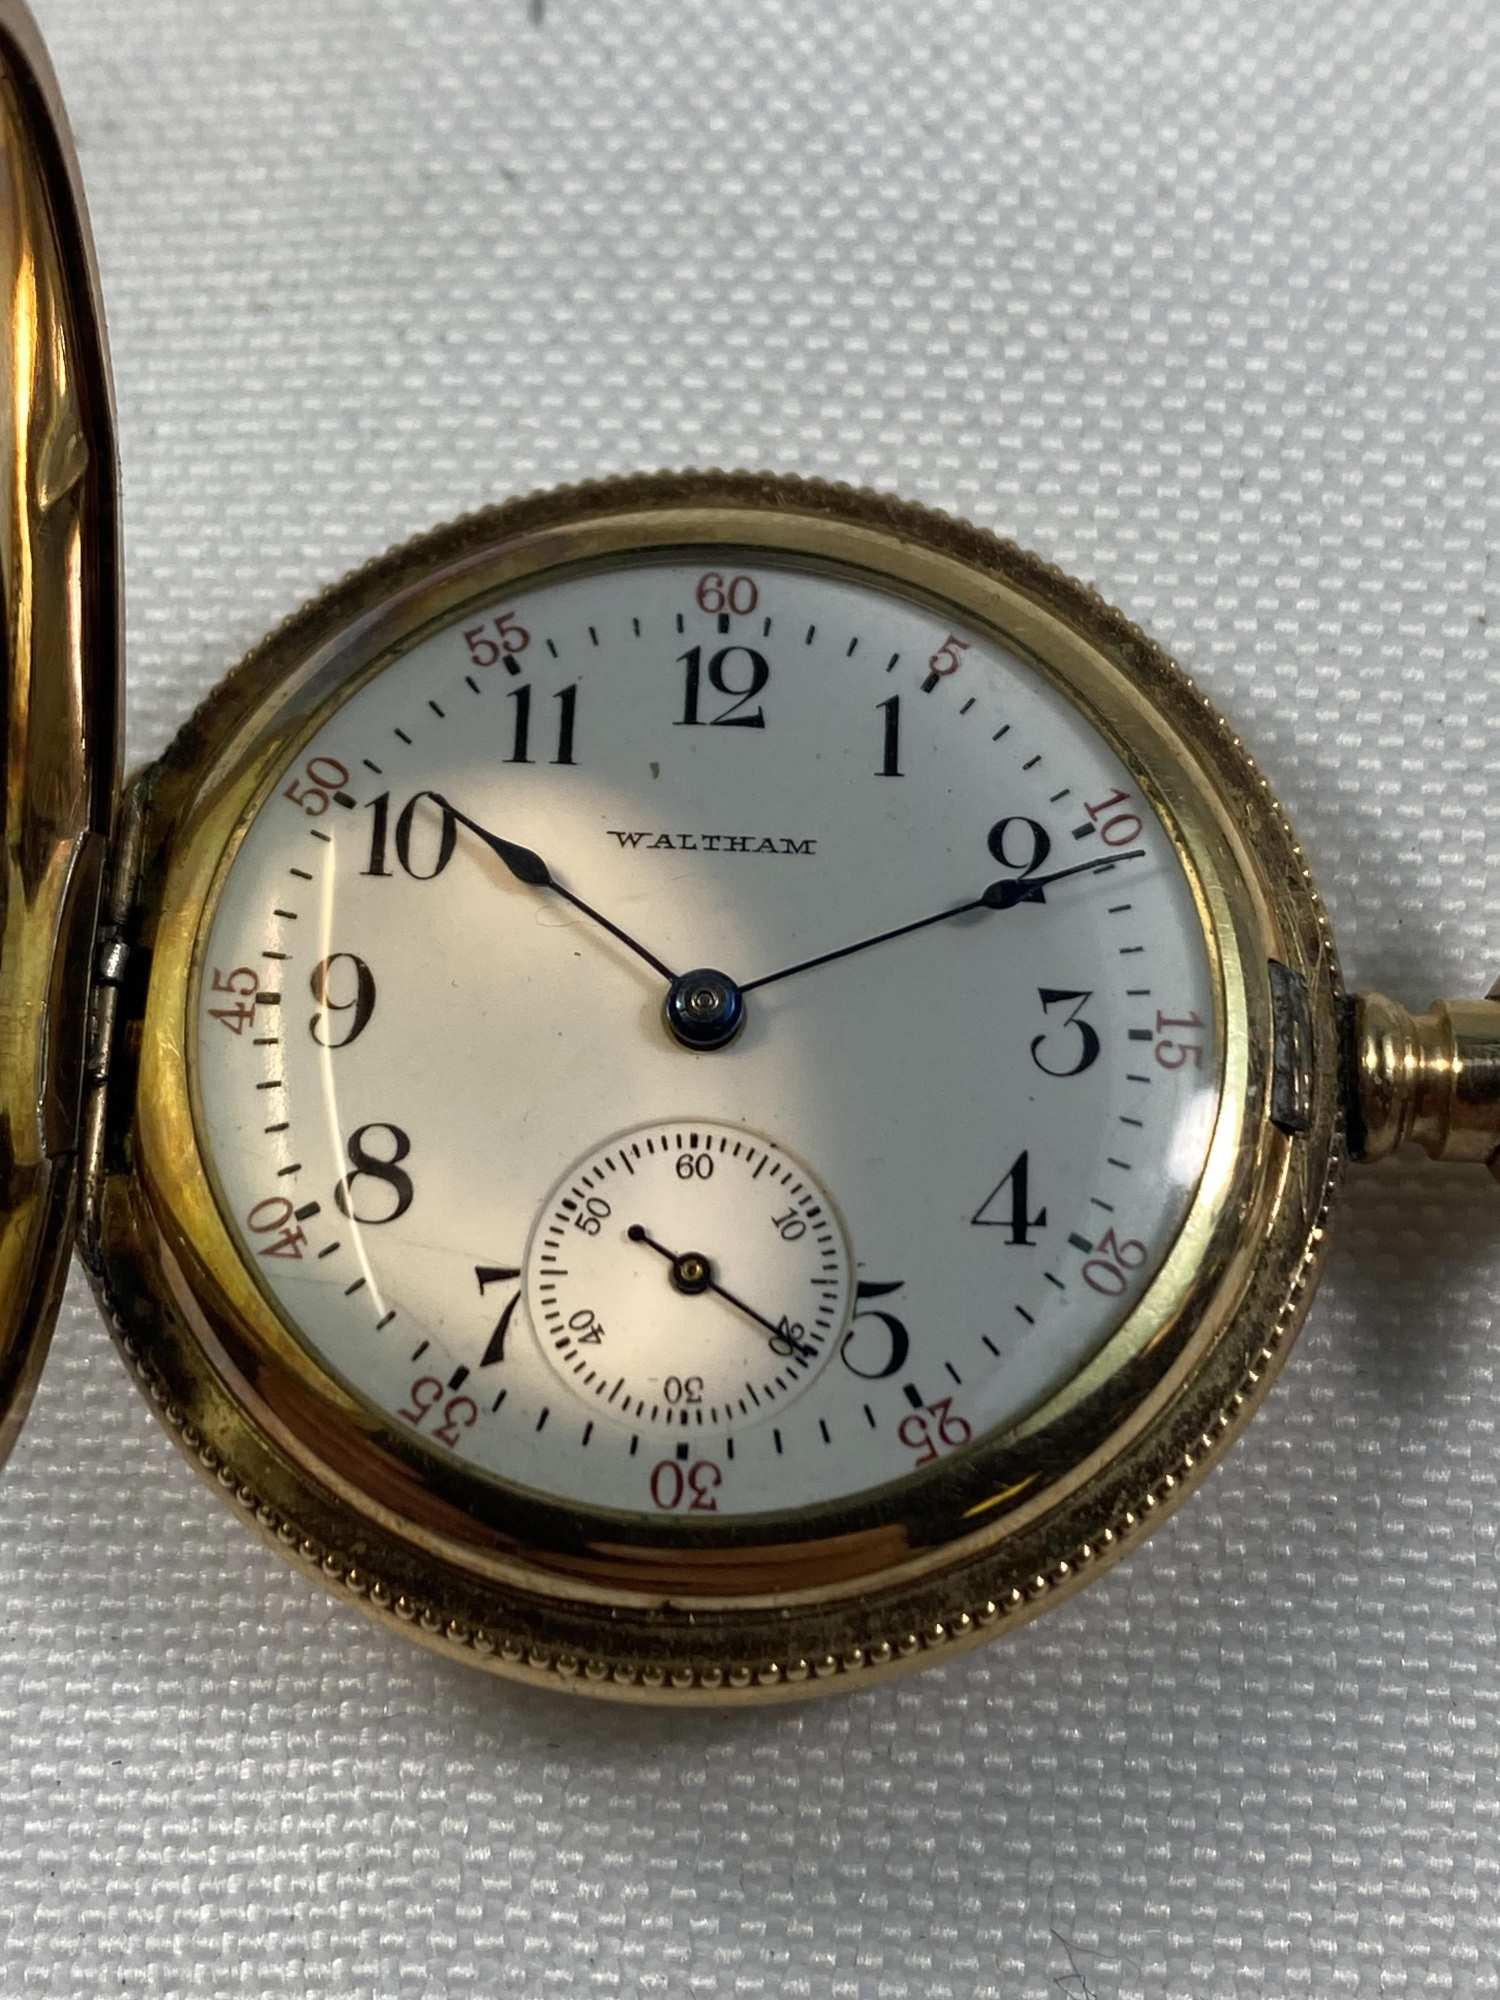 PAIR OF HUNTER CASE POCKET WATCHES